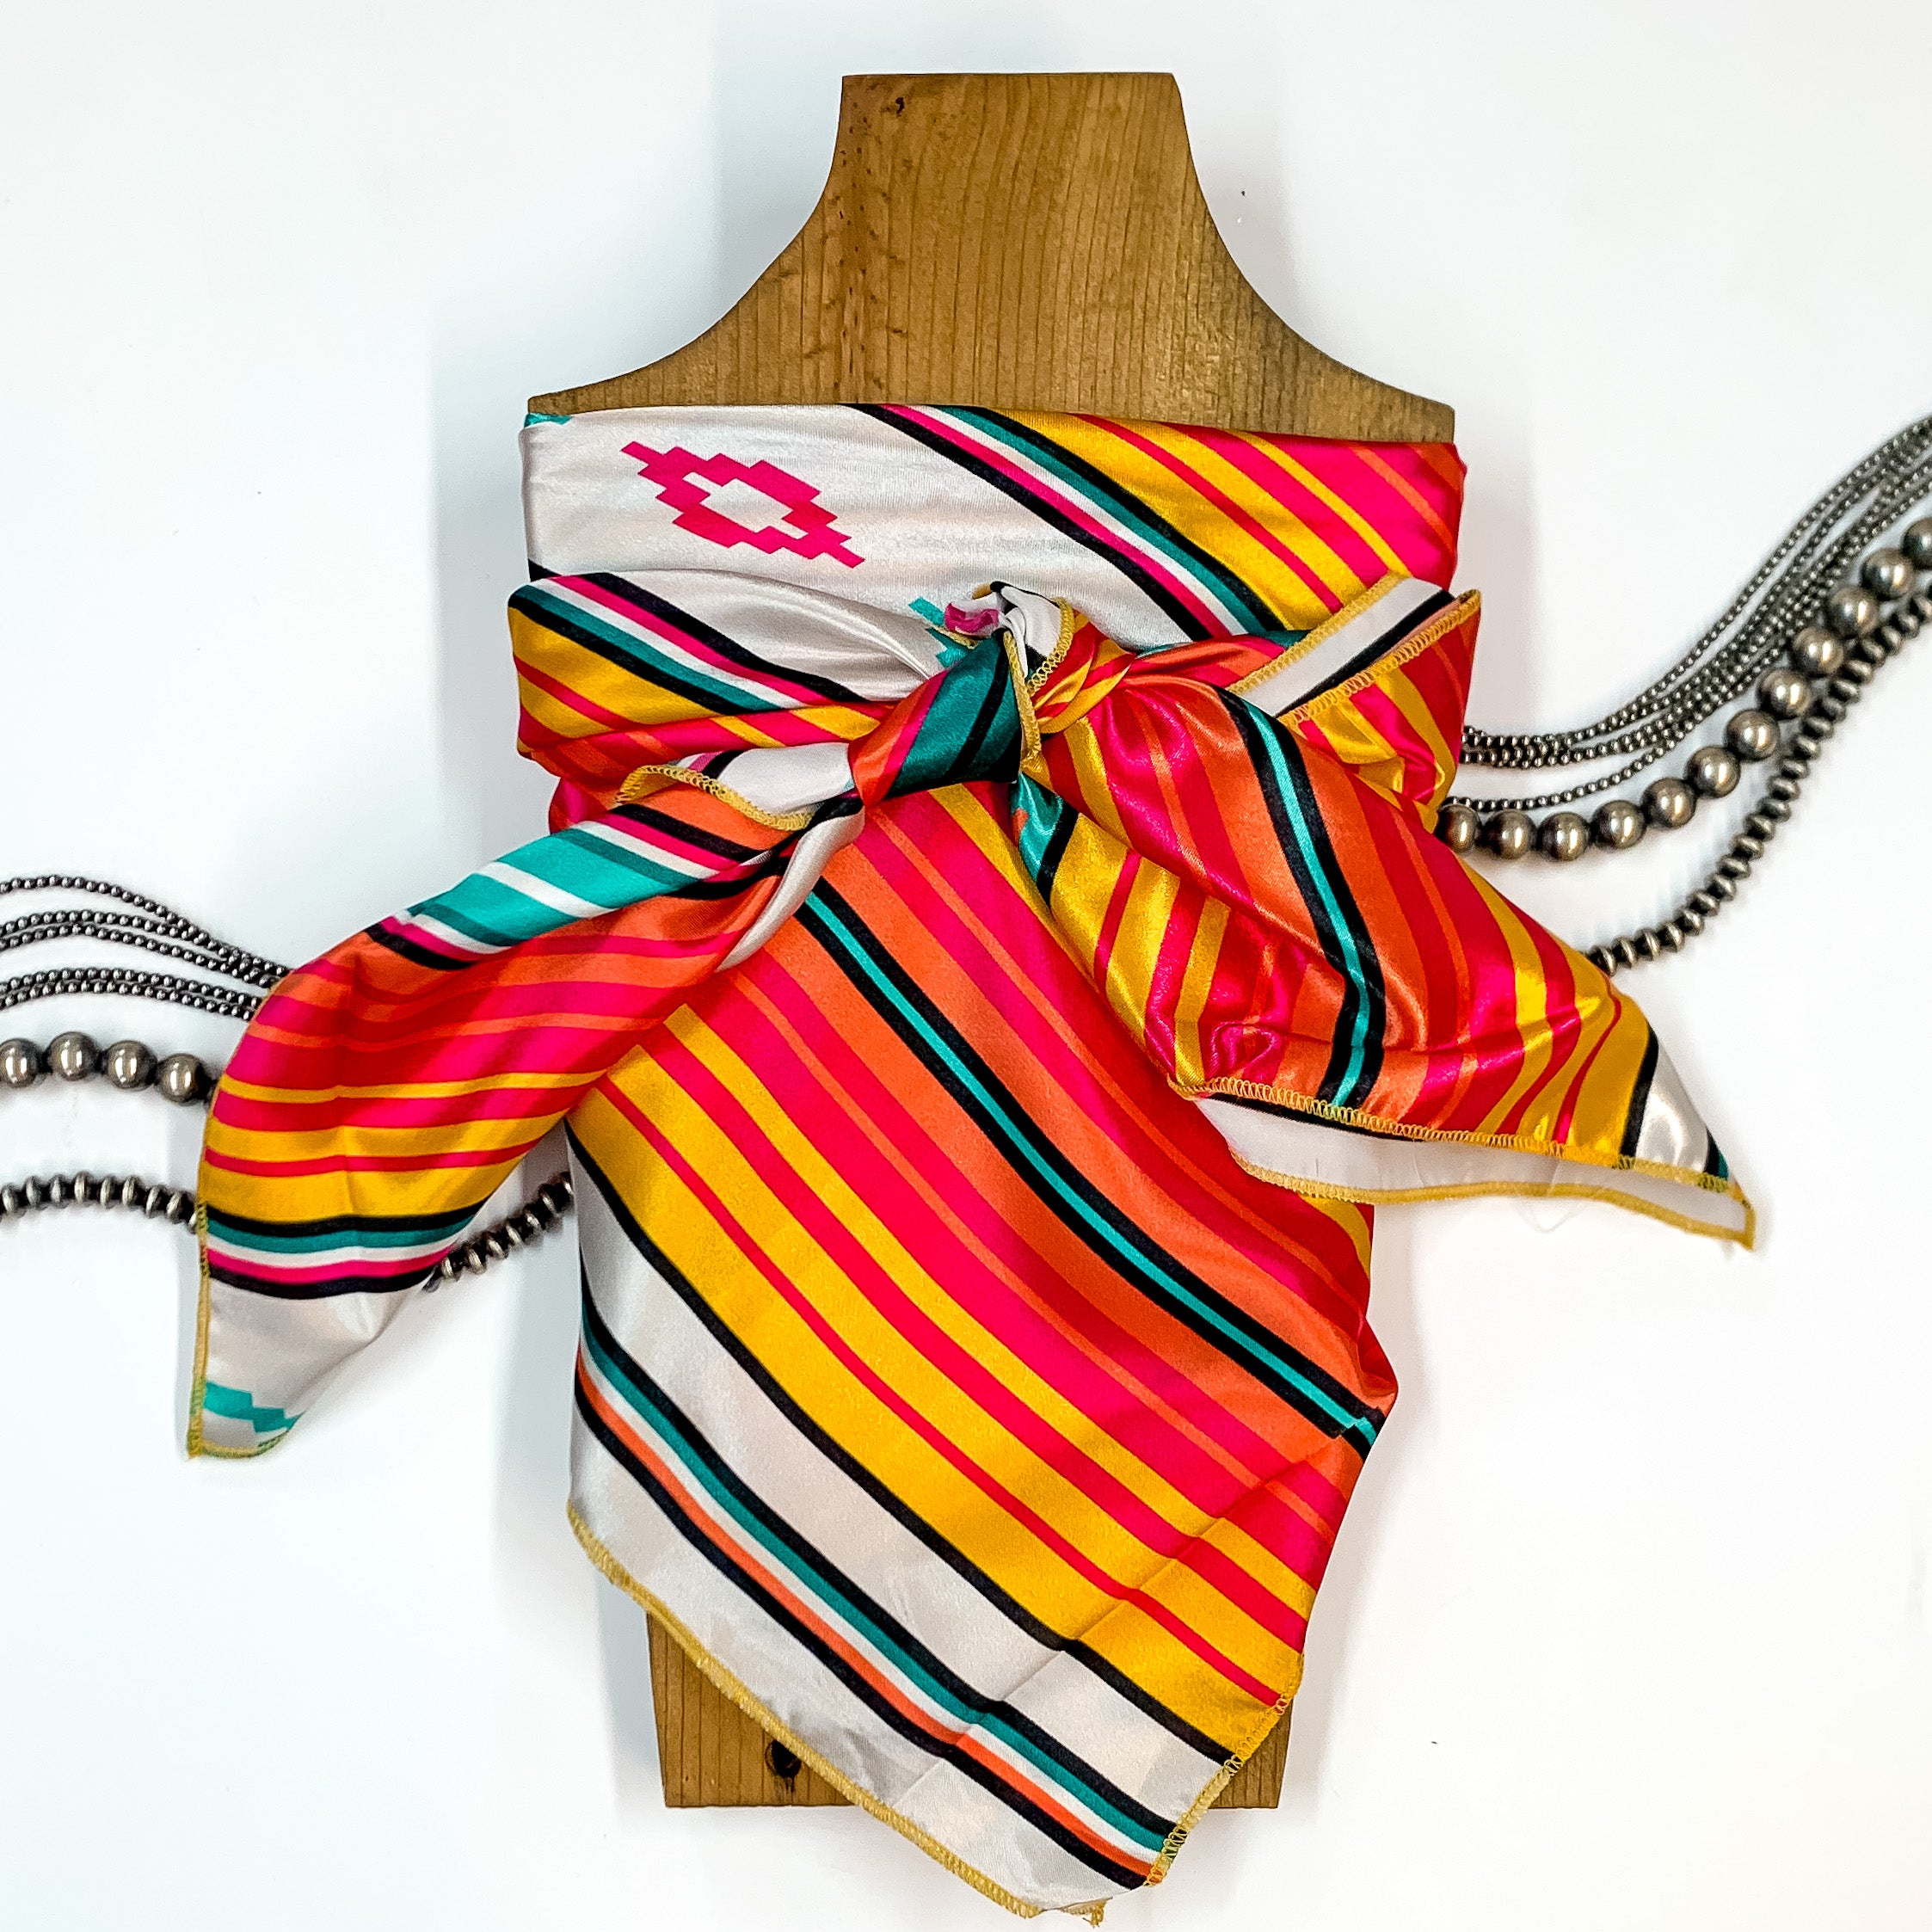 Solid colored scarf in Somerset Serape. Scarf is tied around a wooden piece. The scarf and piece of wood is pictured on a white background with Navajo jewelry spread out around it.